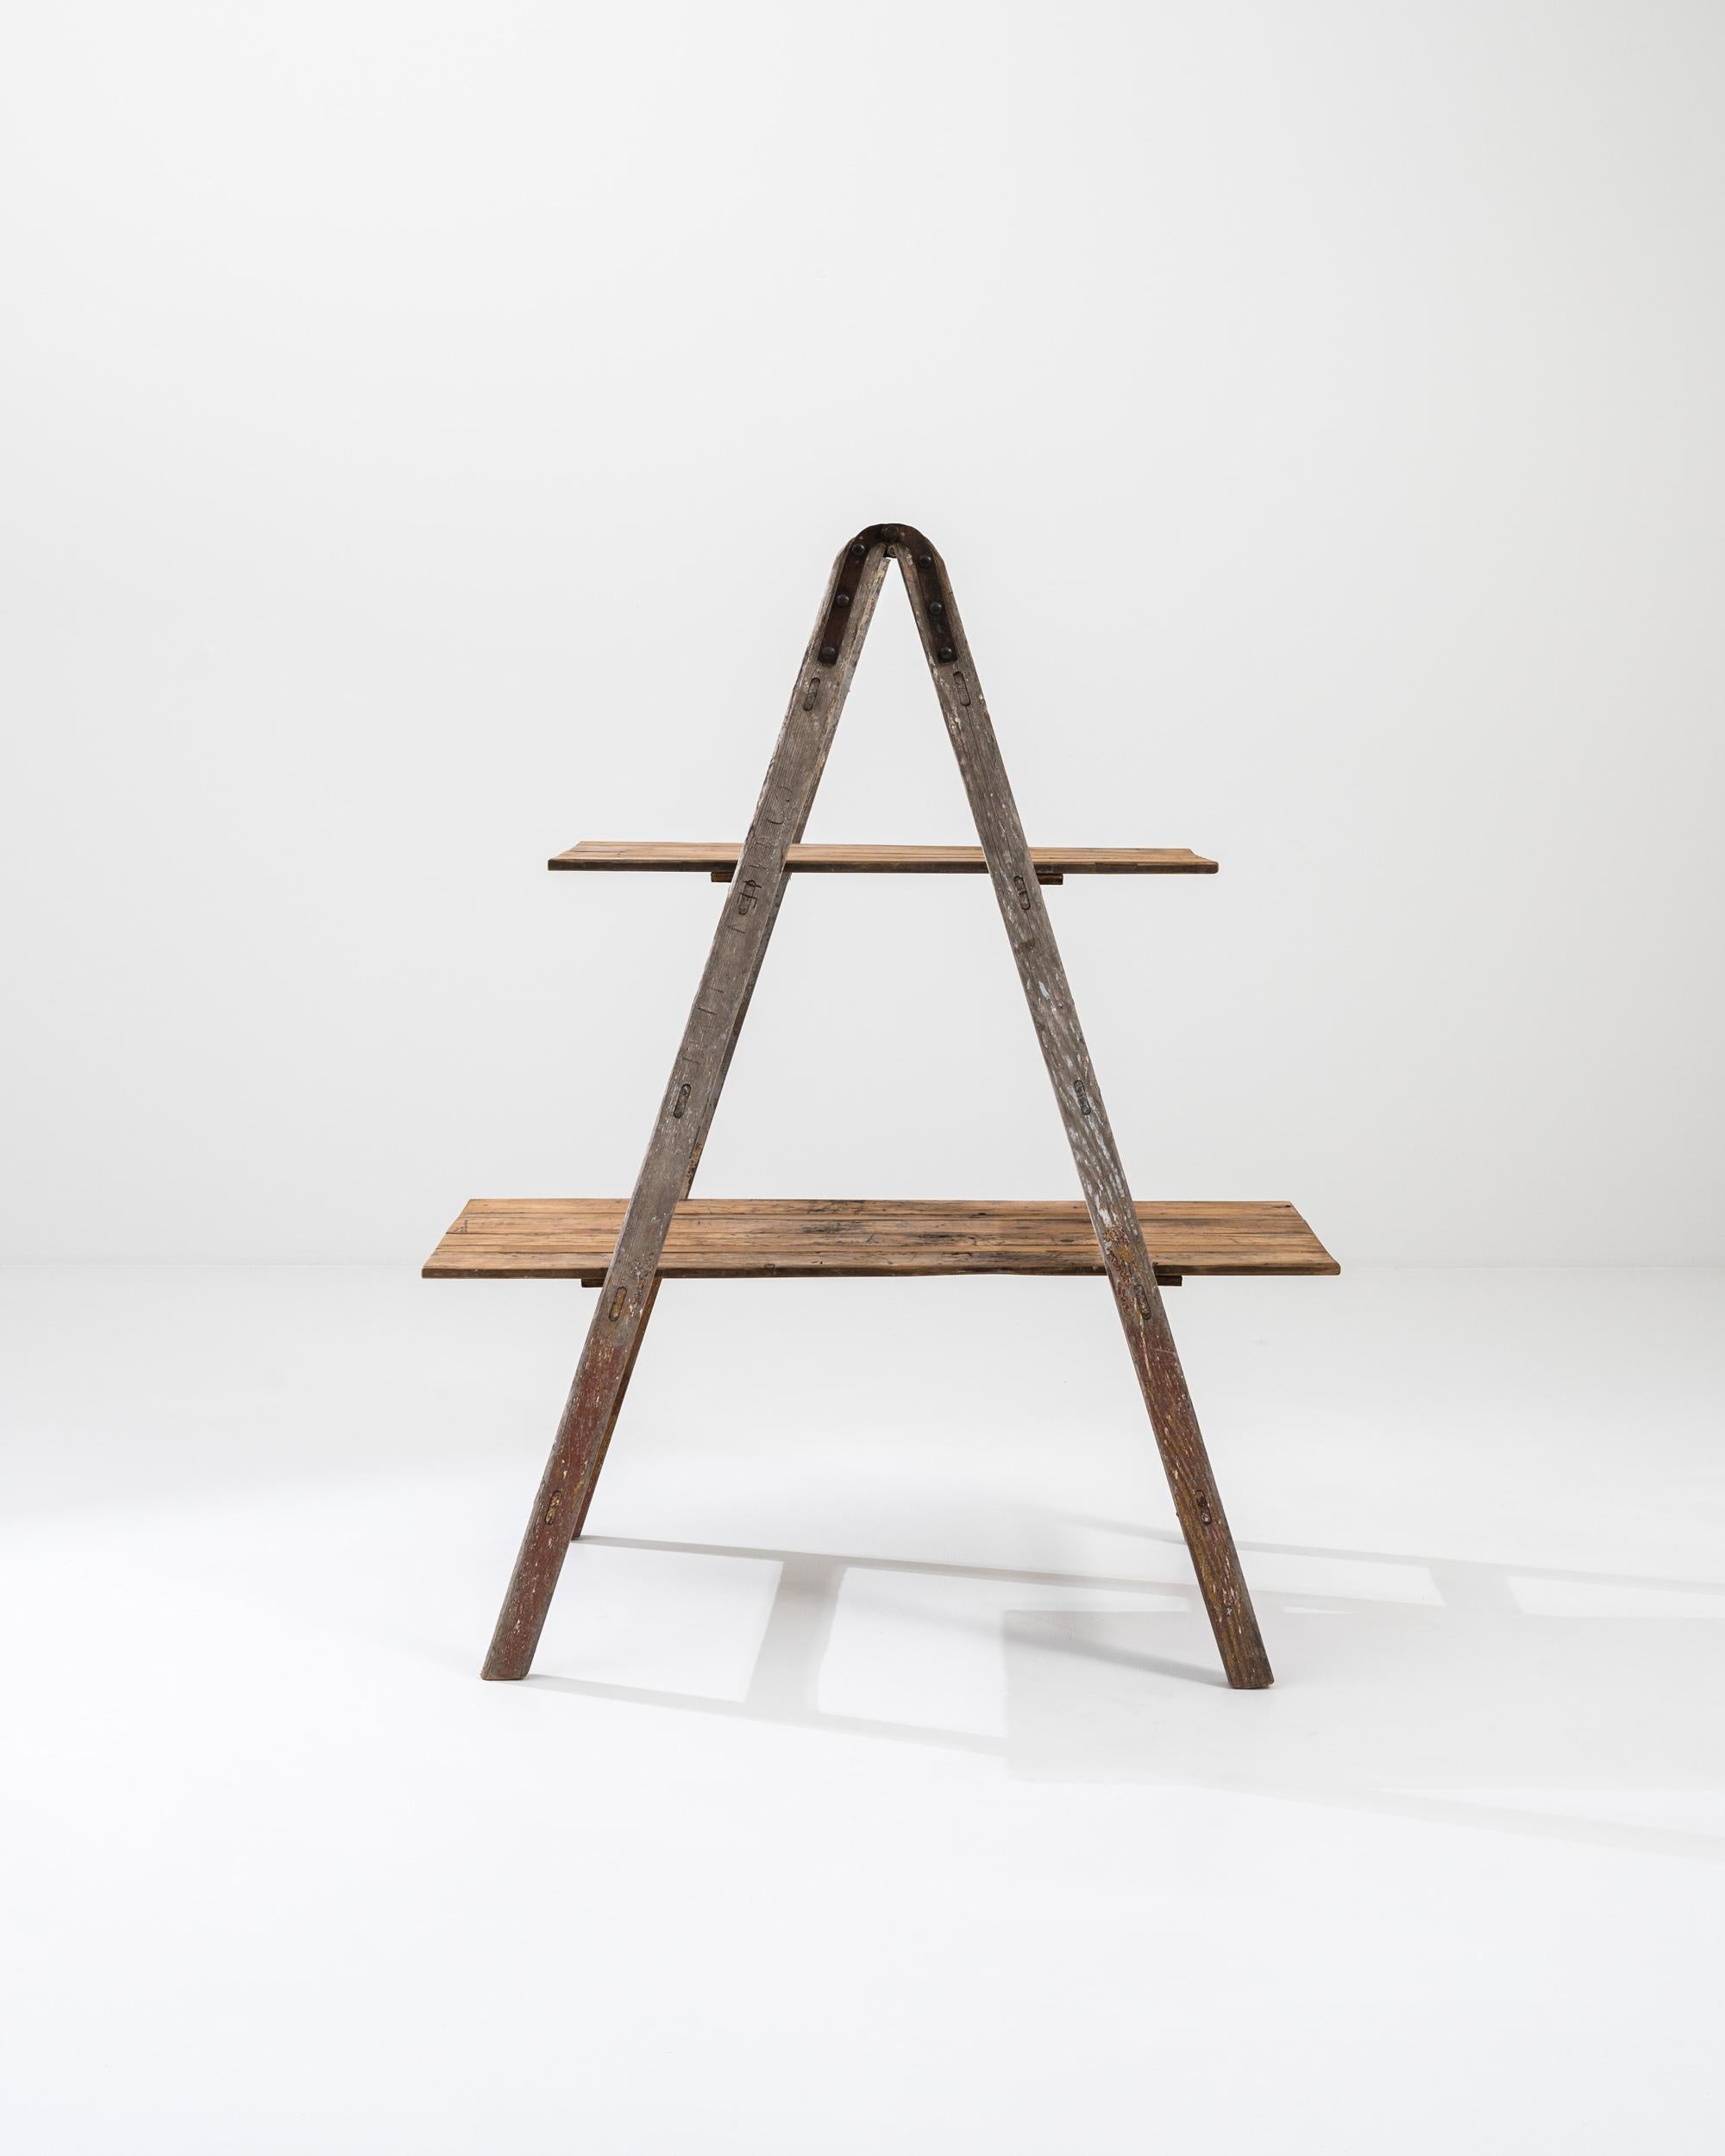 A vintage ladder from early 20th Century France, refigured into a two level shelving unit. Conjuring images of bricolage, this time-traveled object displays a nostalgic patina; scuffs and dings, drips of paint record the telltale stories of projects